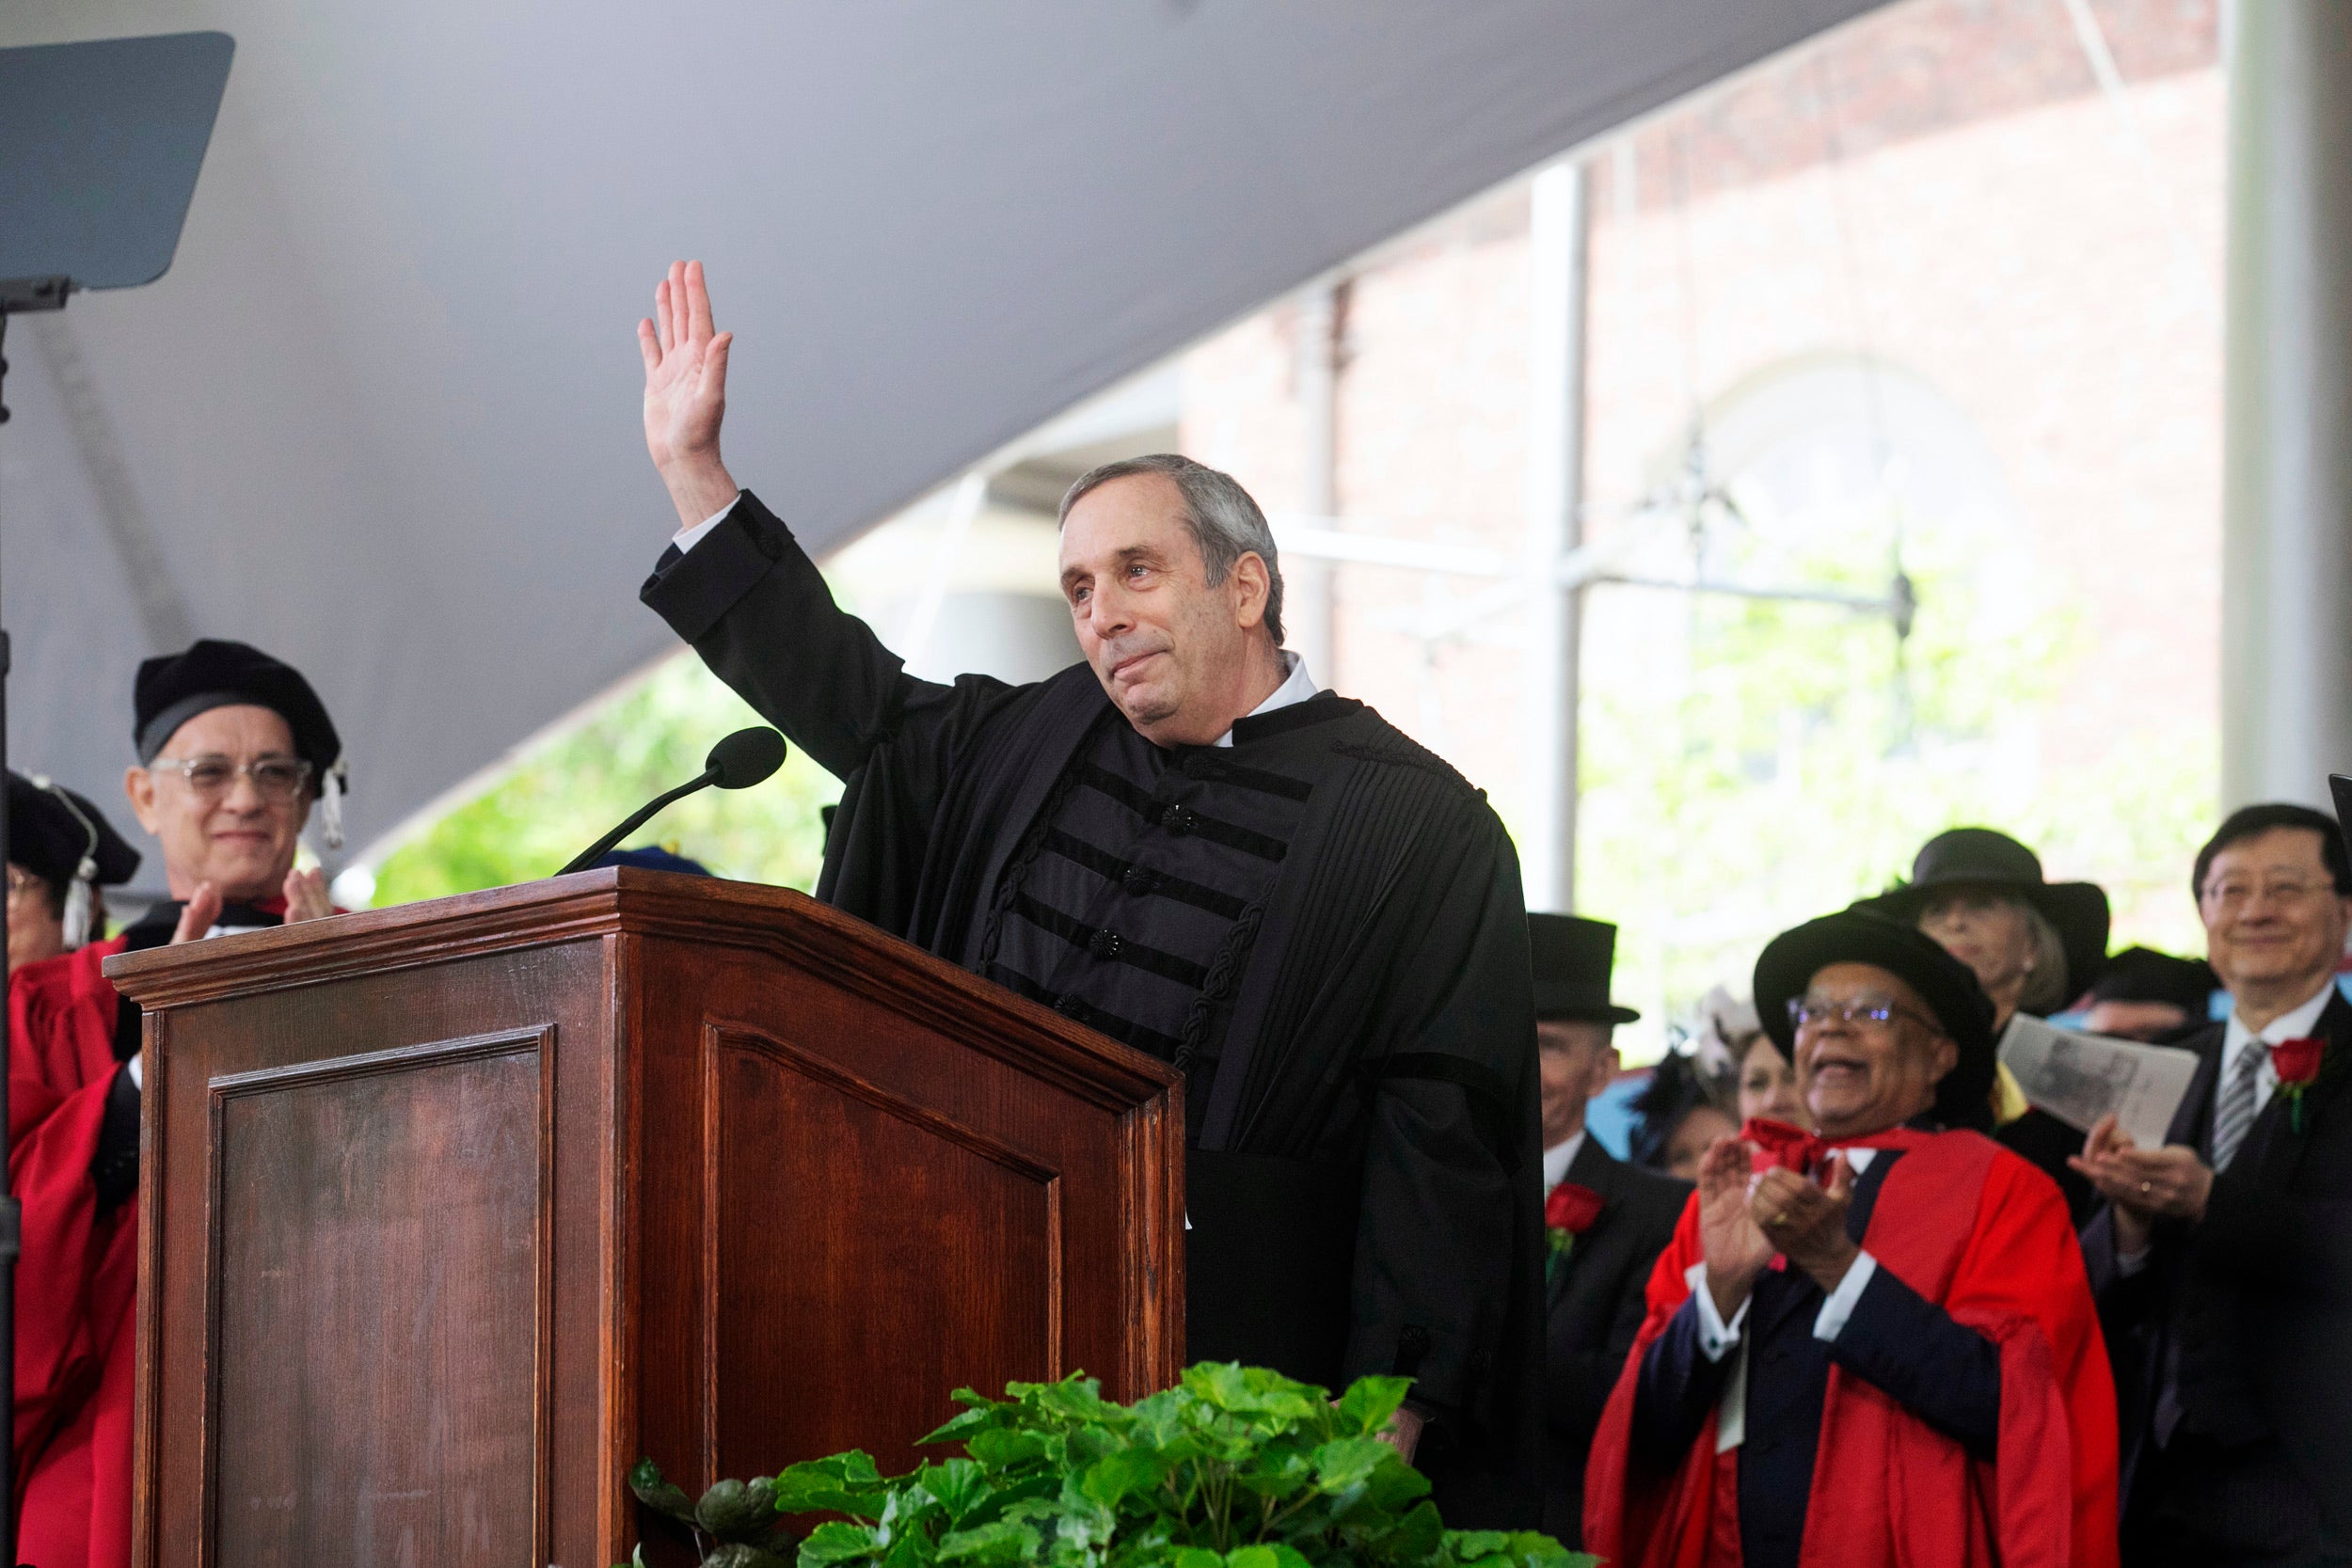 Larry Bacow waves at podium.